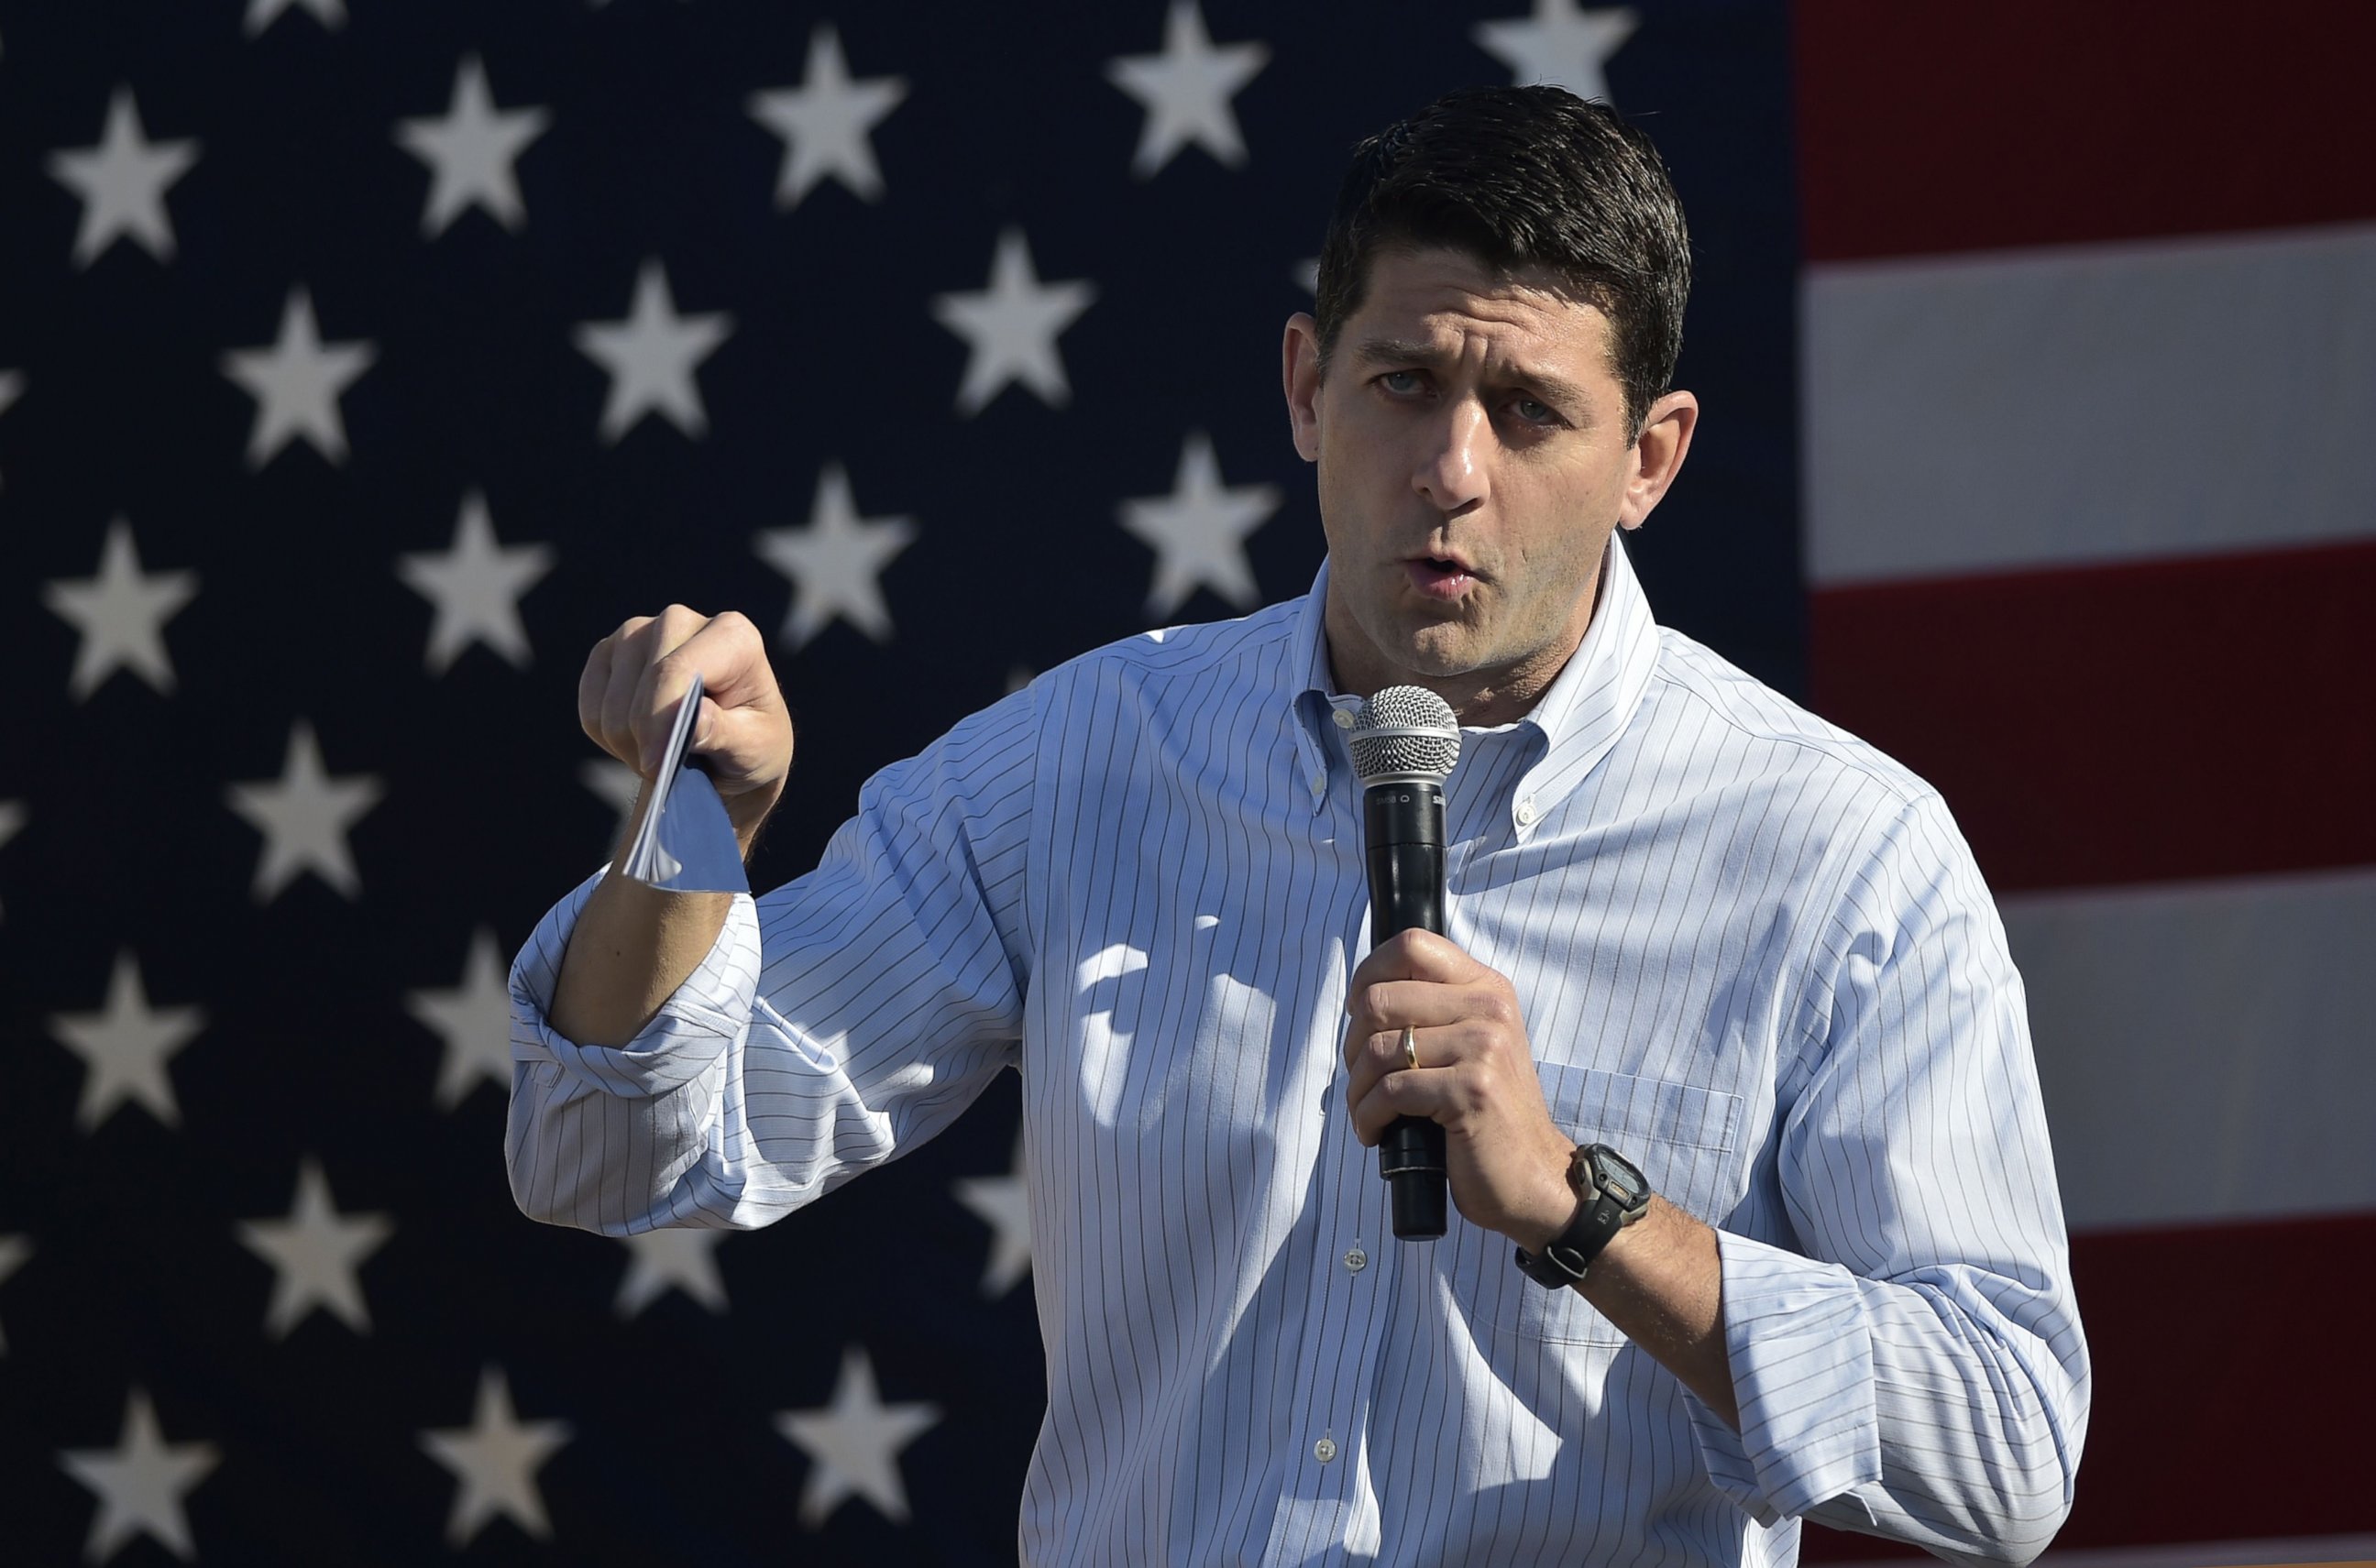 PHOTO: House Speaker Paul Ryan speaks during the 1st Congressional District Republican Party of Wisconsin Fall Fest, Oct. 8, 2016 at the Walworth County Fairgrounds in Elkhorn, Wisconsin.